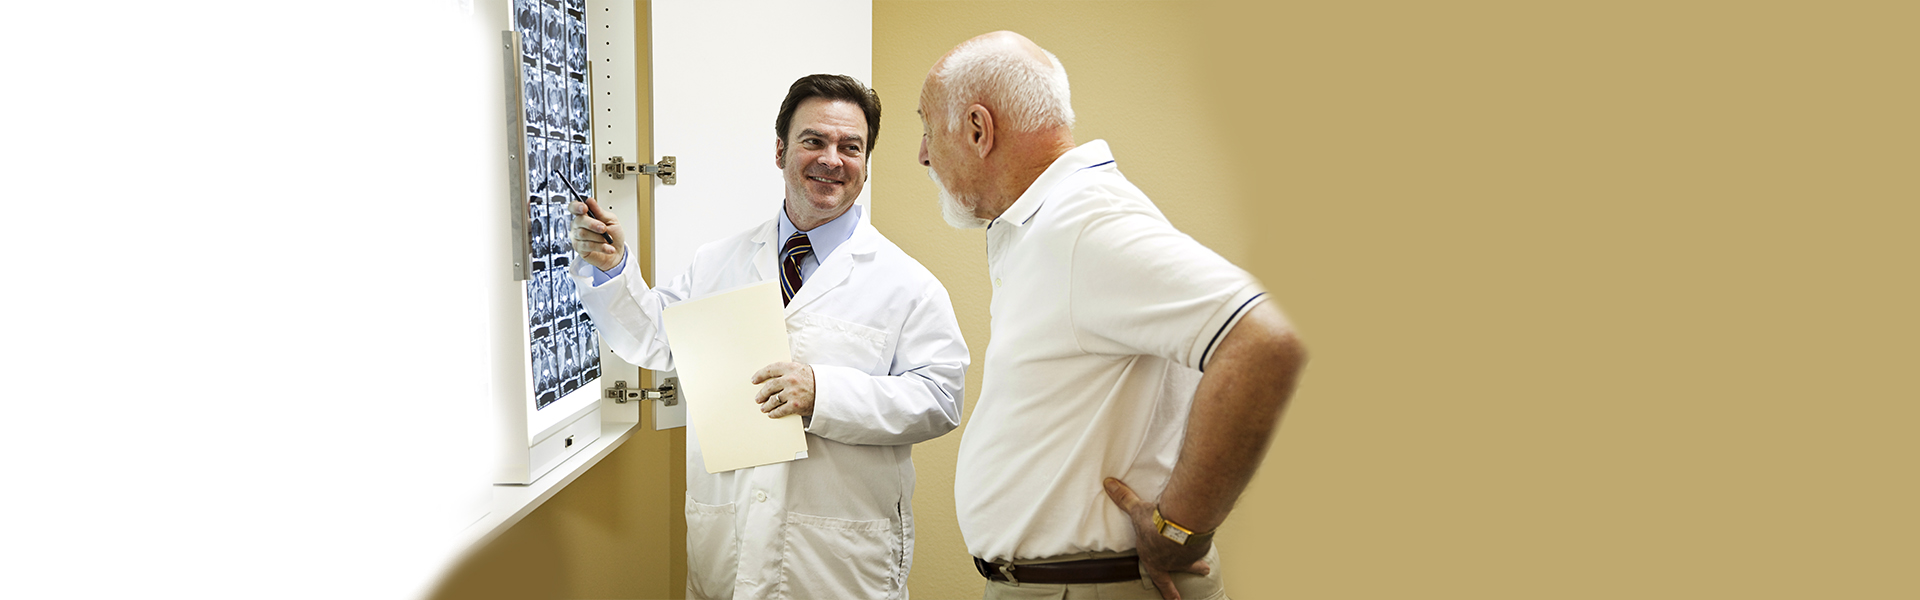 Spinal and Postural Screenings with Dr. Neil Jackson, Your Chiropractor in Traverse City, MI